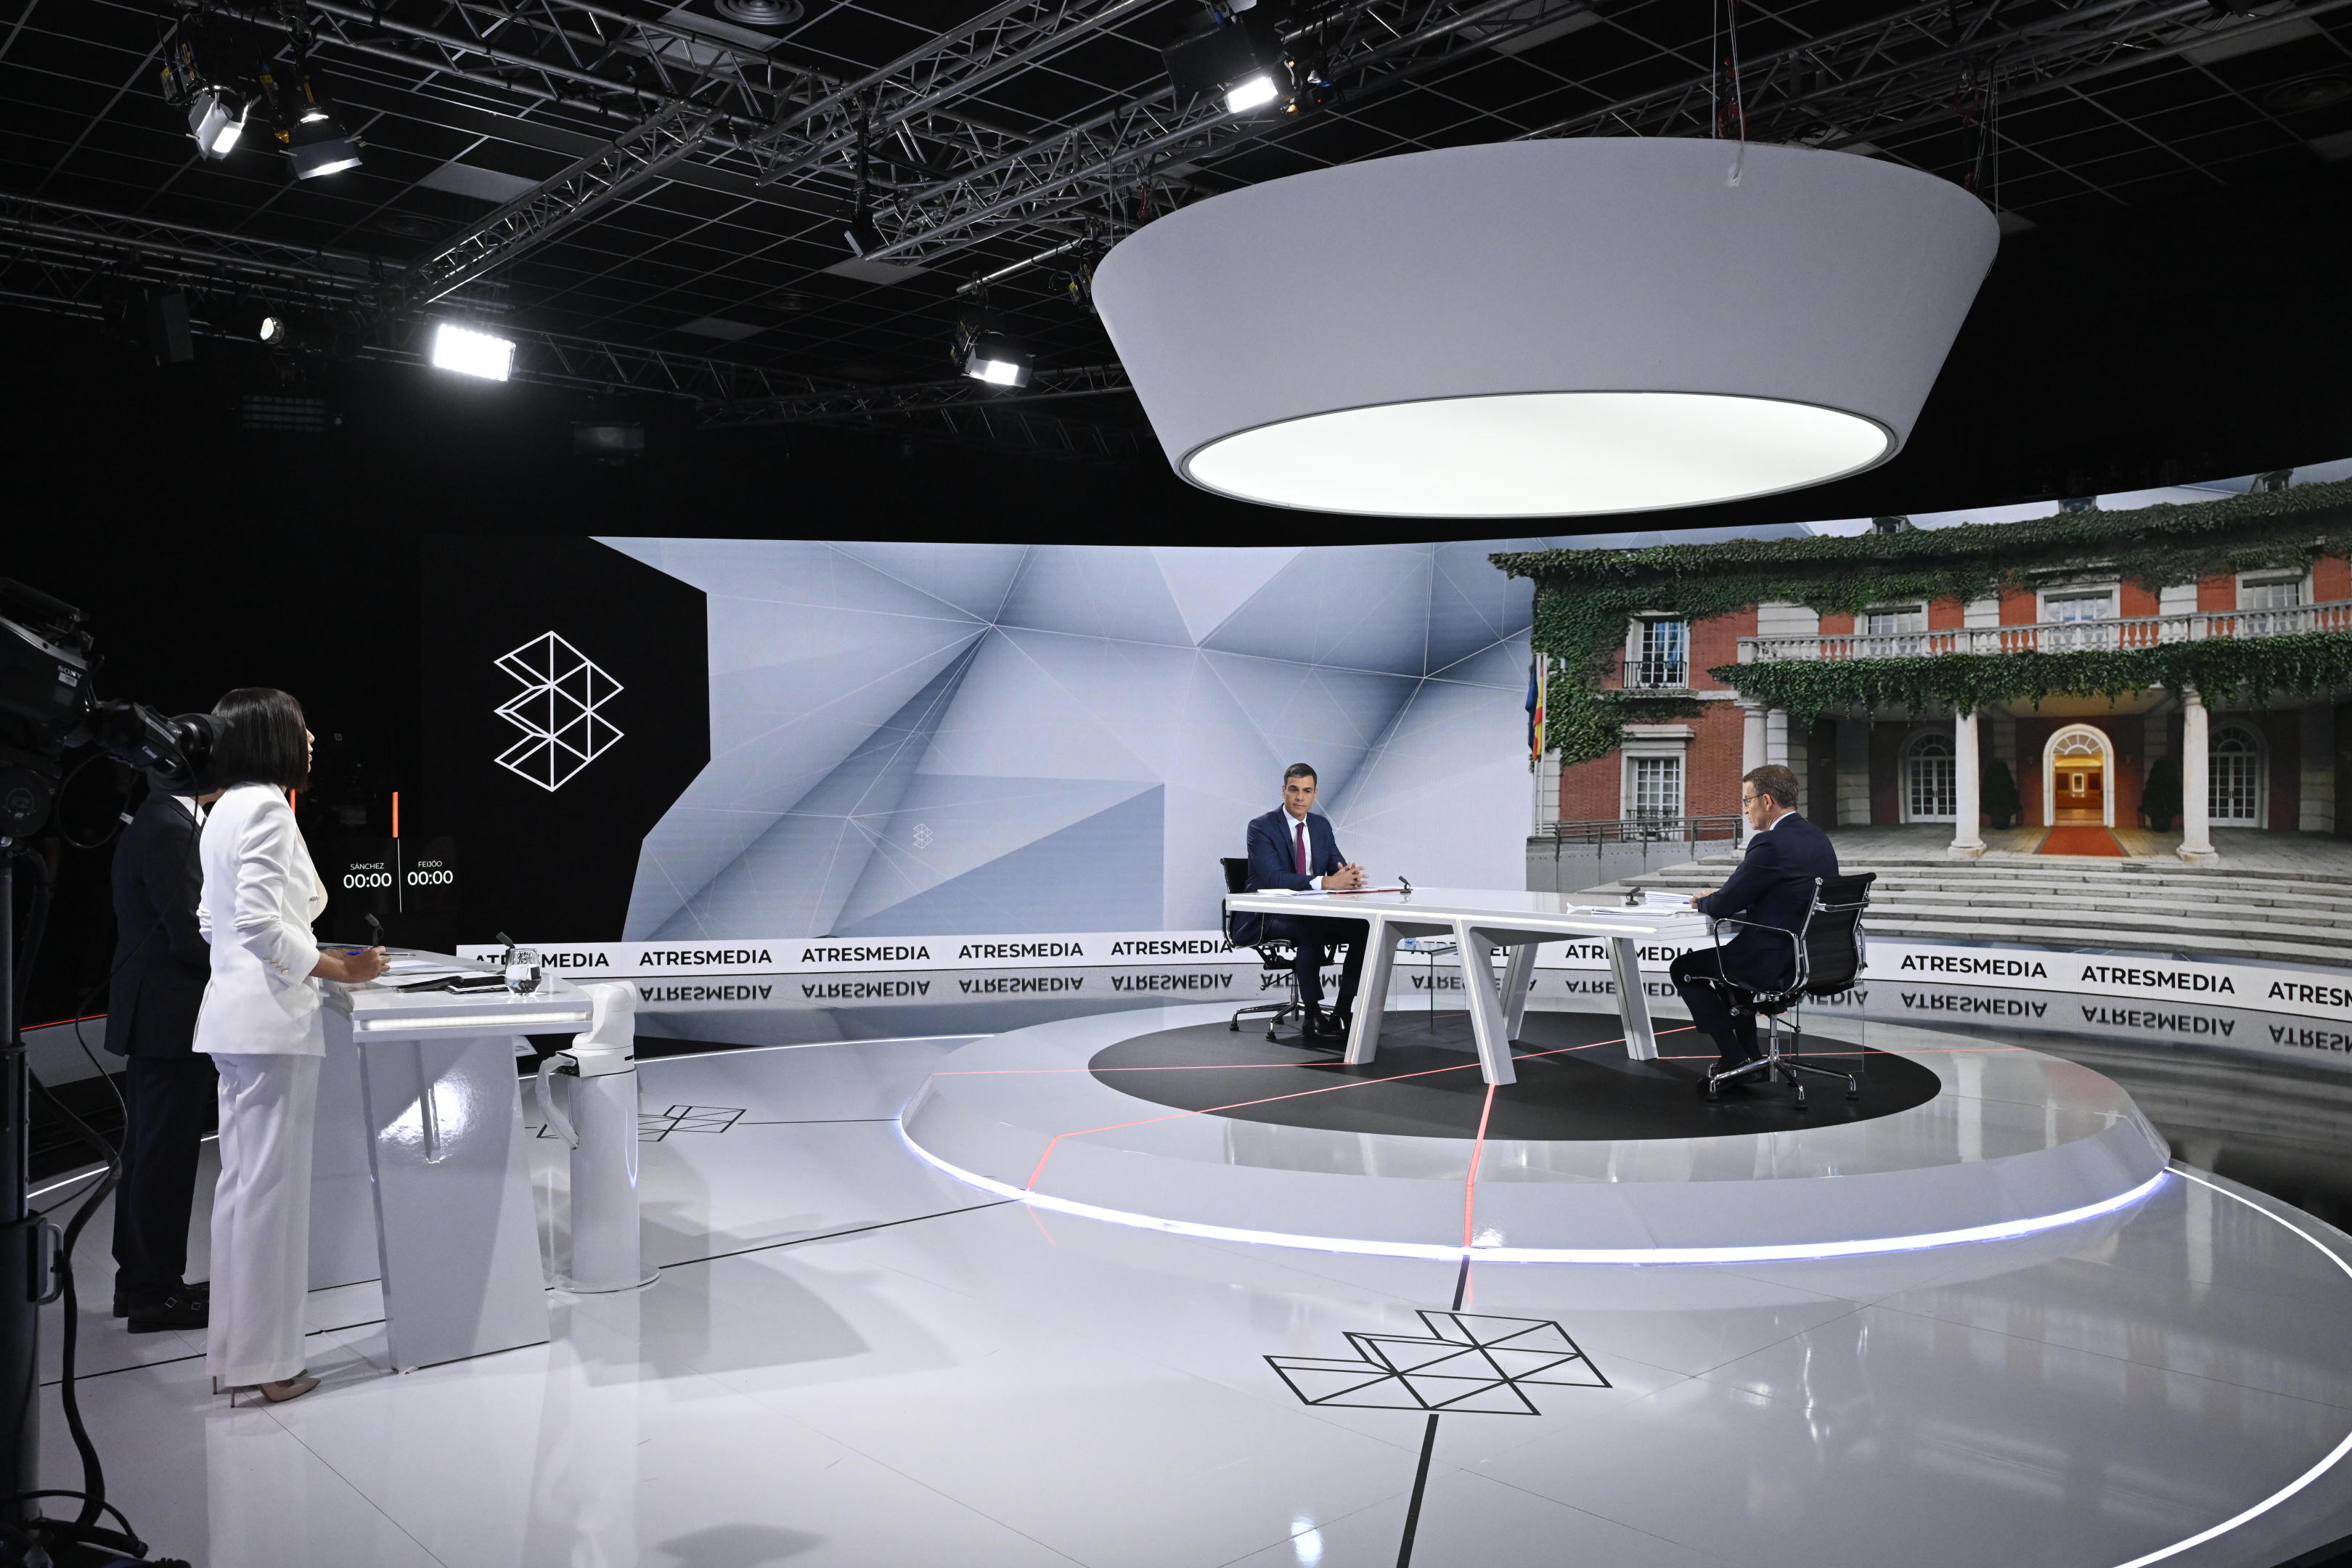 Spain's current PM, Pedro Sánchez of the Socialists, and the conservative People's Party candidate Alberto Núñez Feijóo, faced off in the only televised debate on July 10, 2023